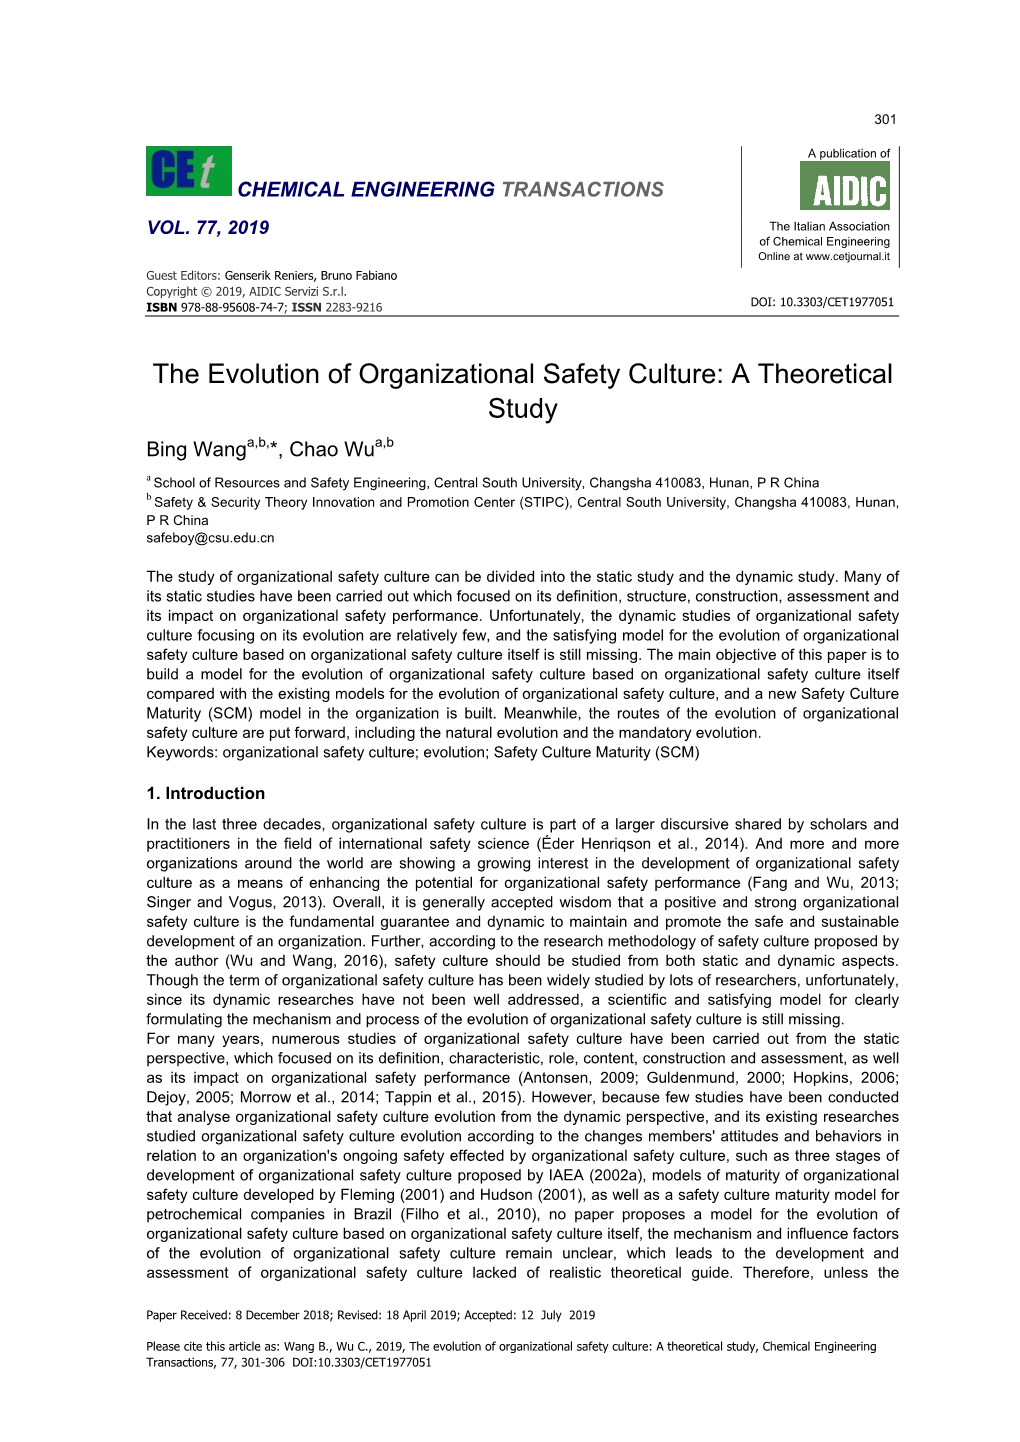 The Evolution of Organizational Safety Culture: a Theoretical Study